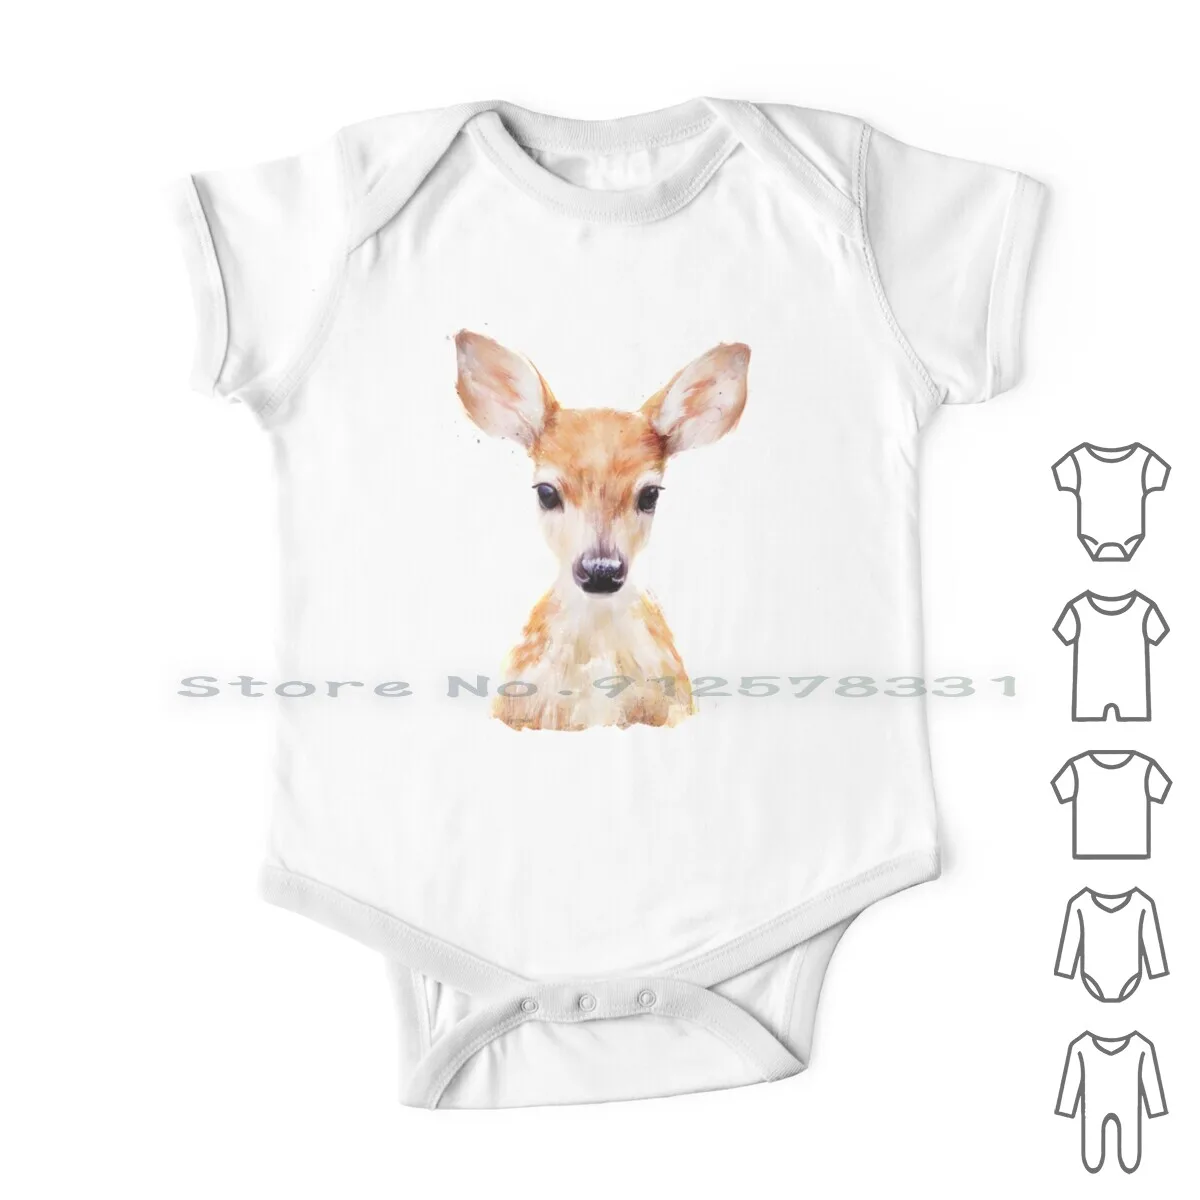 

Little Deer Newborn Baby Clothes Rompers Cotton Jumpsuits Nature Animals Wildlife Wilderness Fauna Forest Woodland Creature Amy